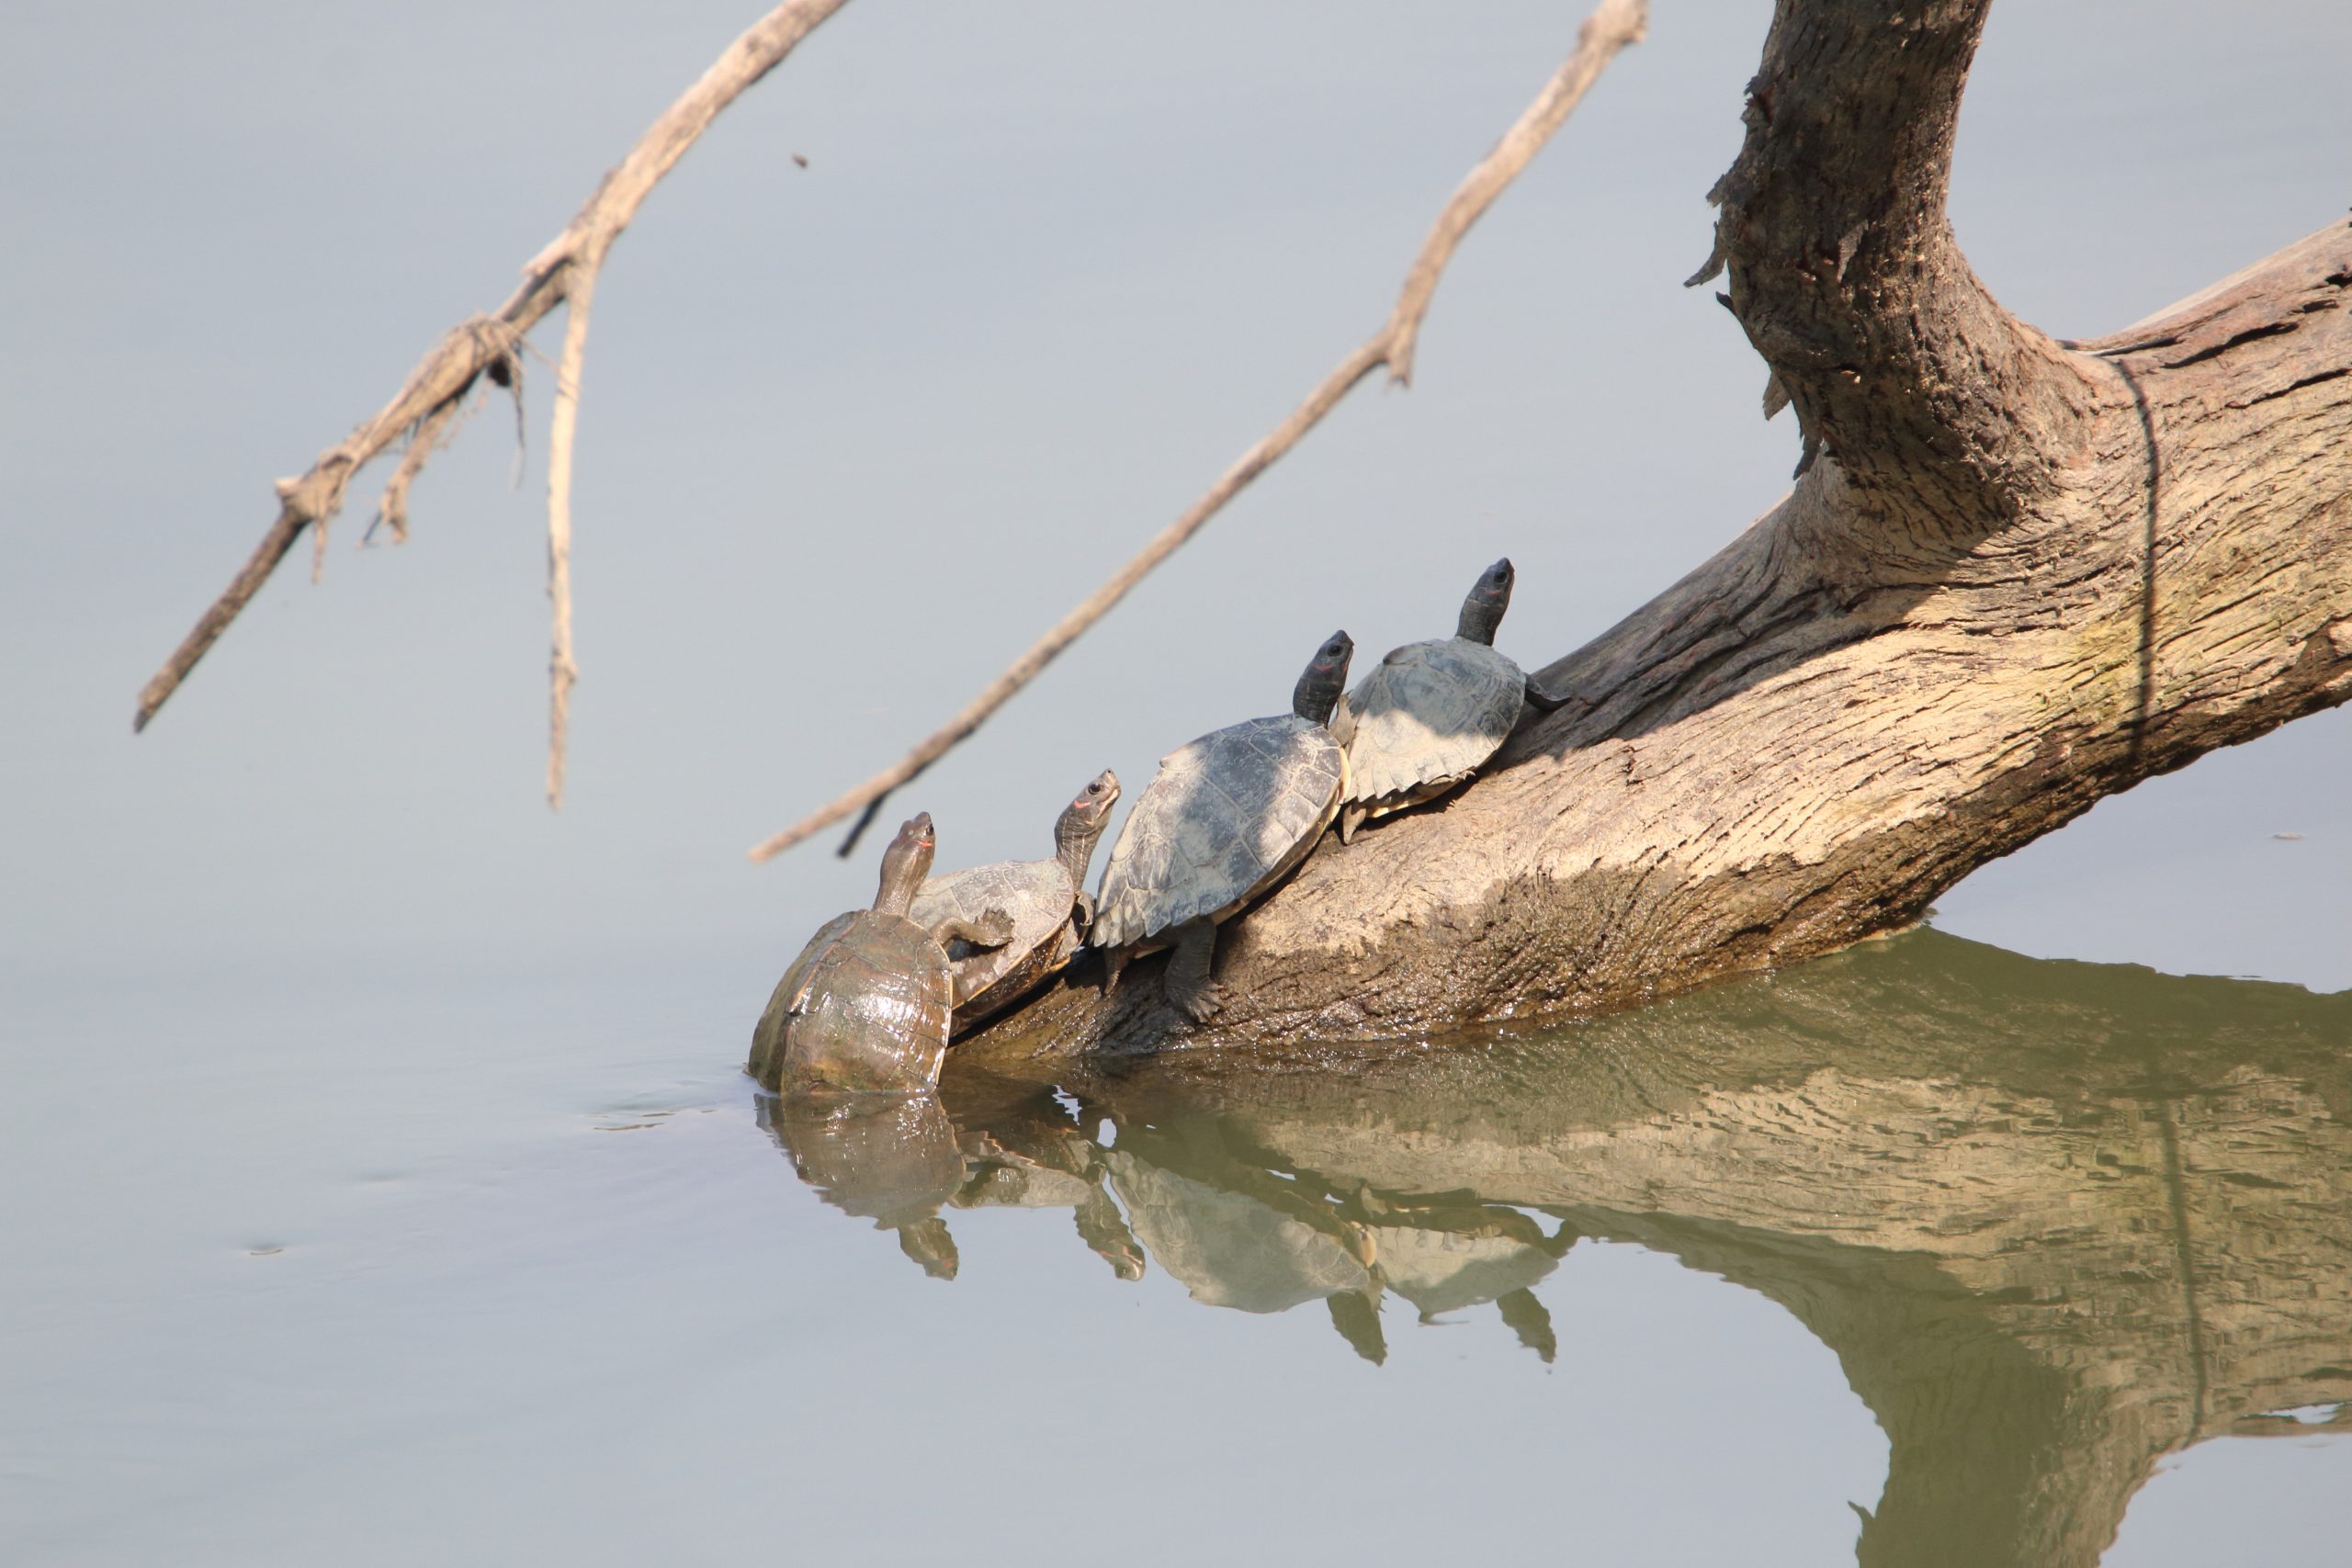 Turtles coming out of a river